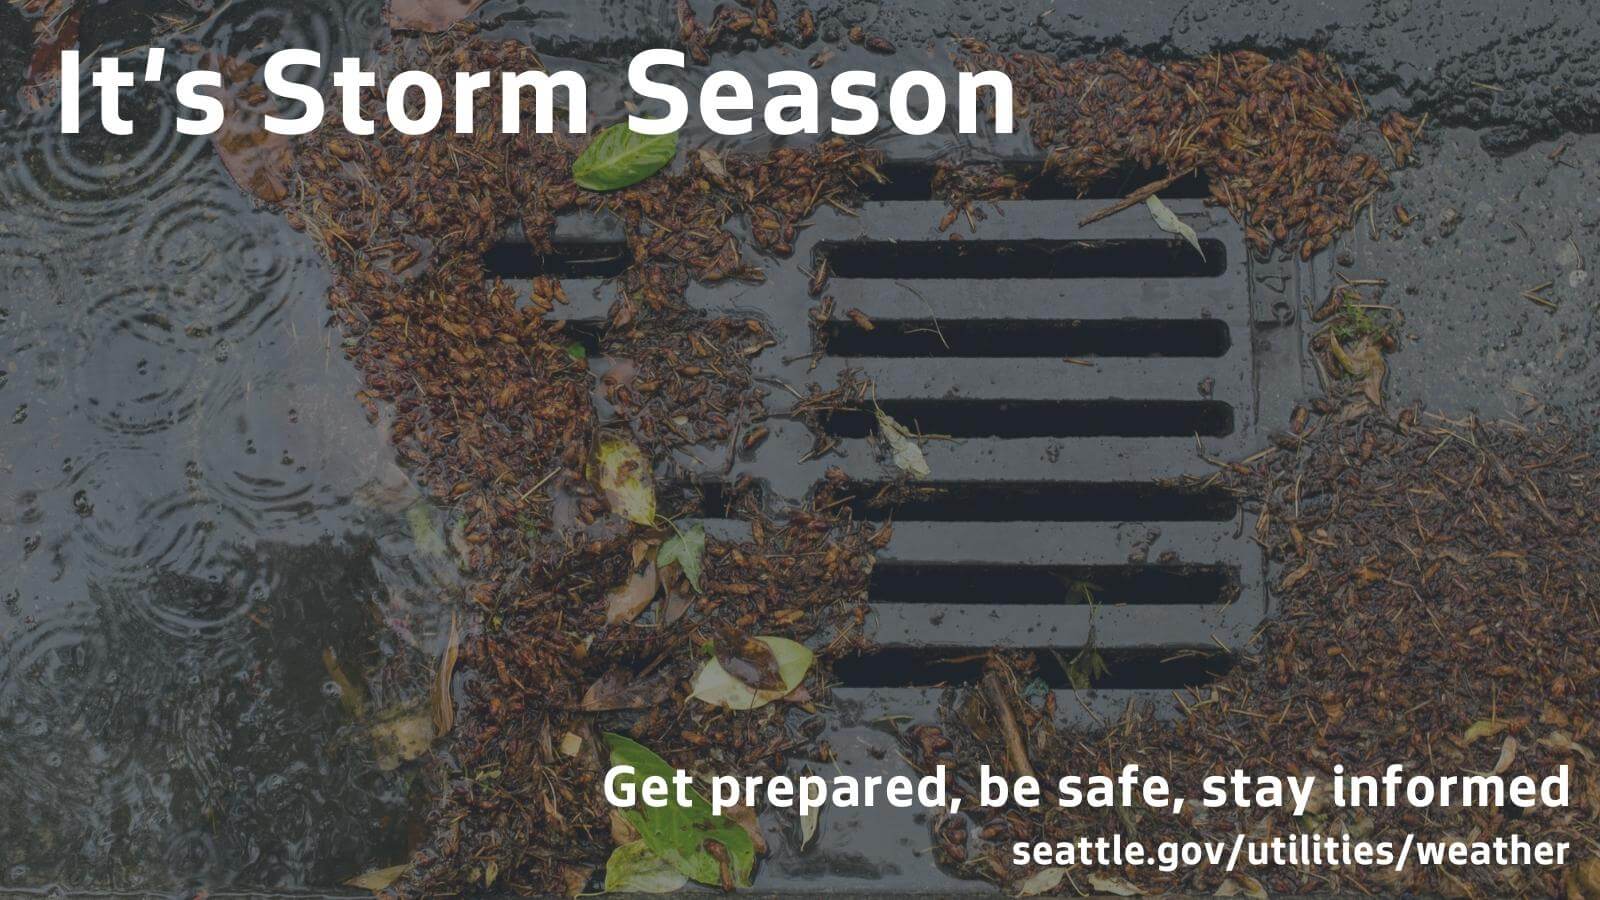 It's Storm Season: Get prepared, be safe, stay informed at https://seattle.gov/utilities/weather